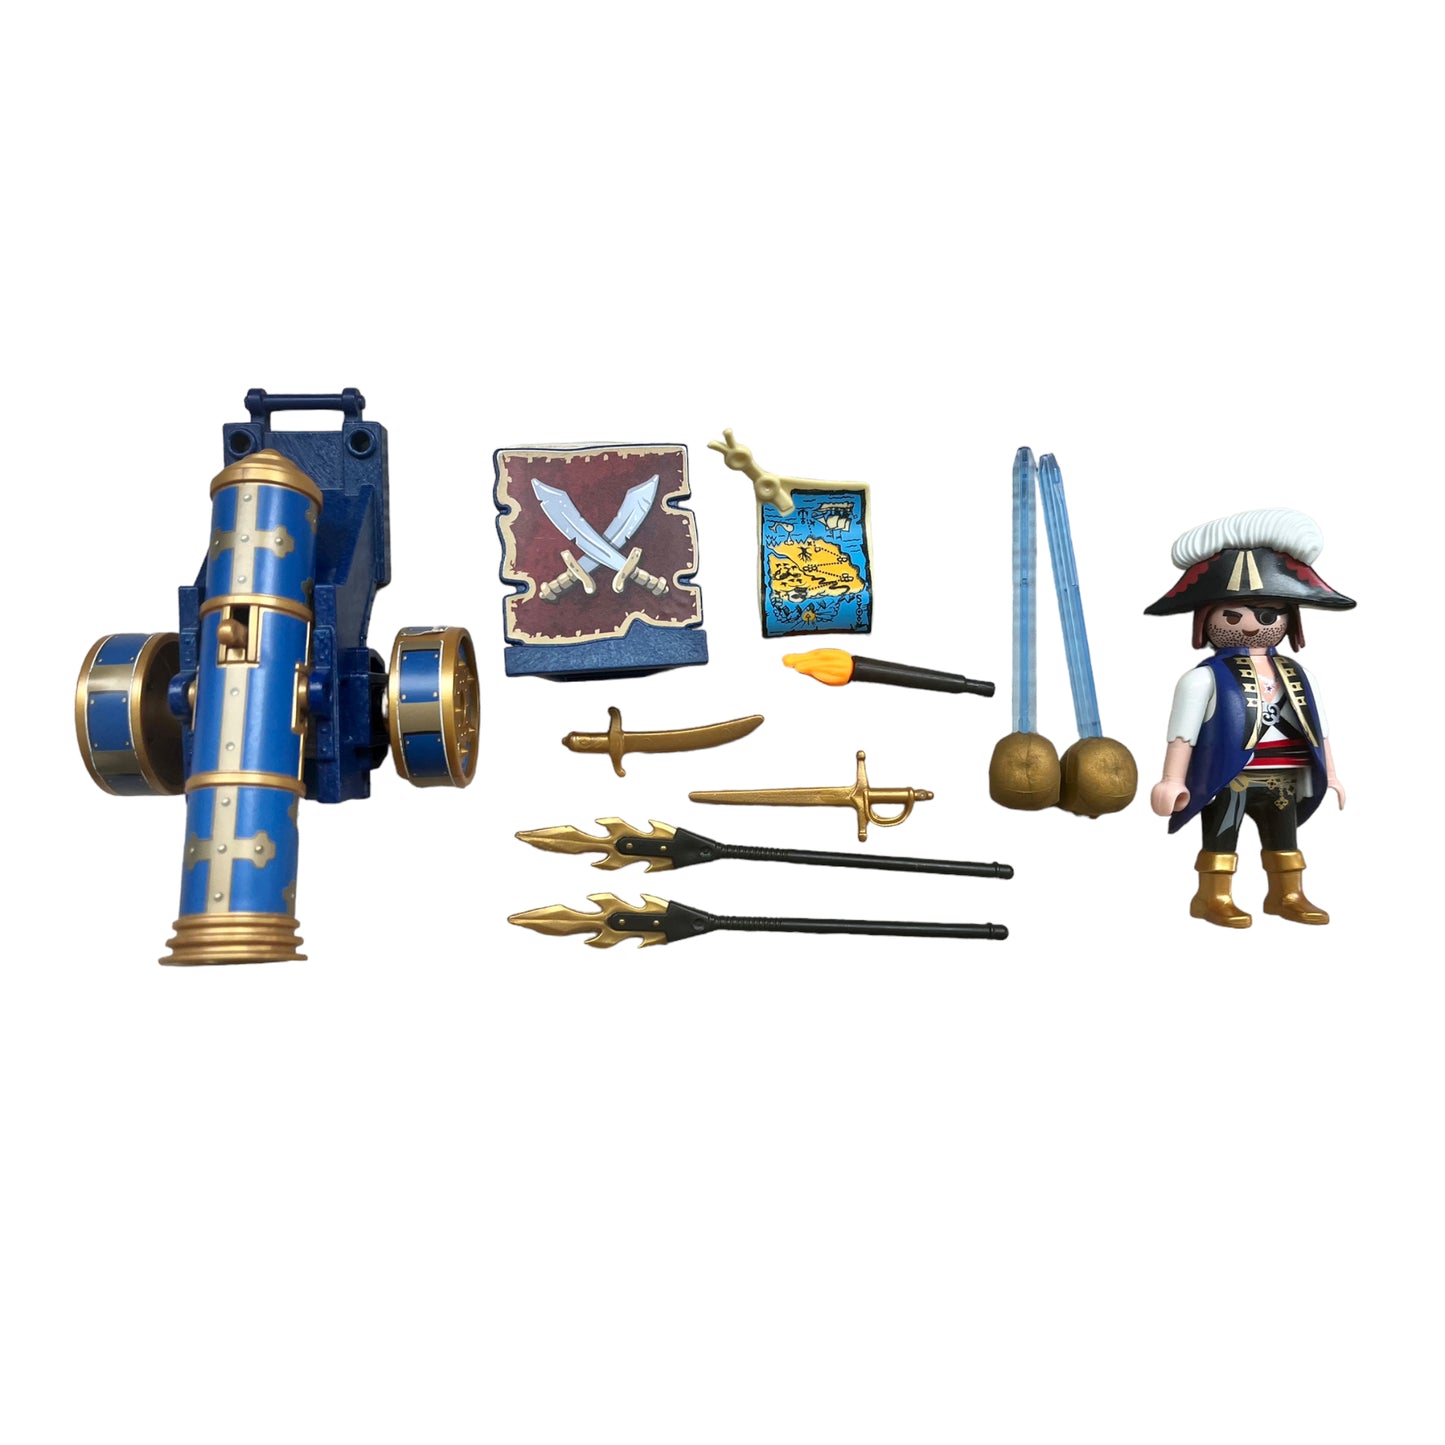 Playmobil ® Pirates - Blue app cannon with pirate officer - 6164